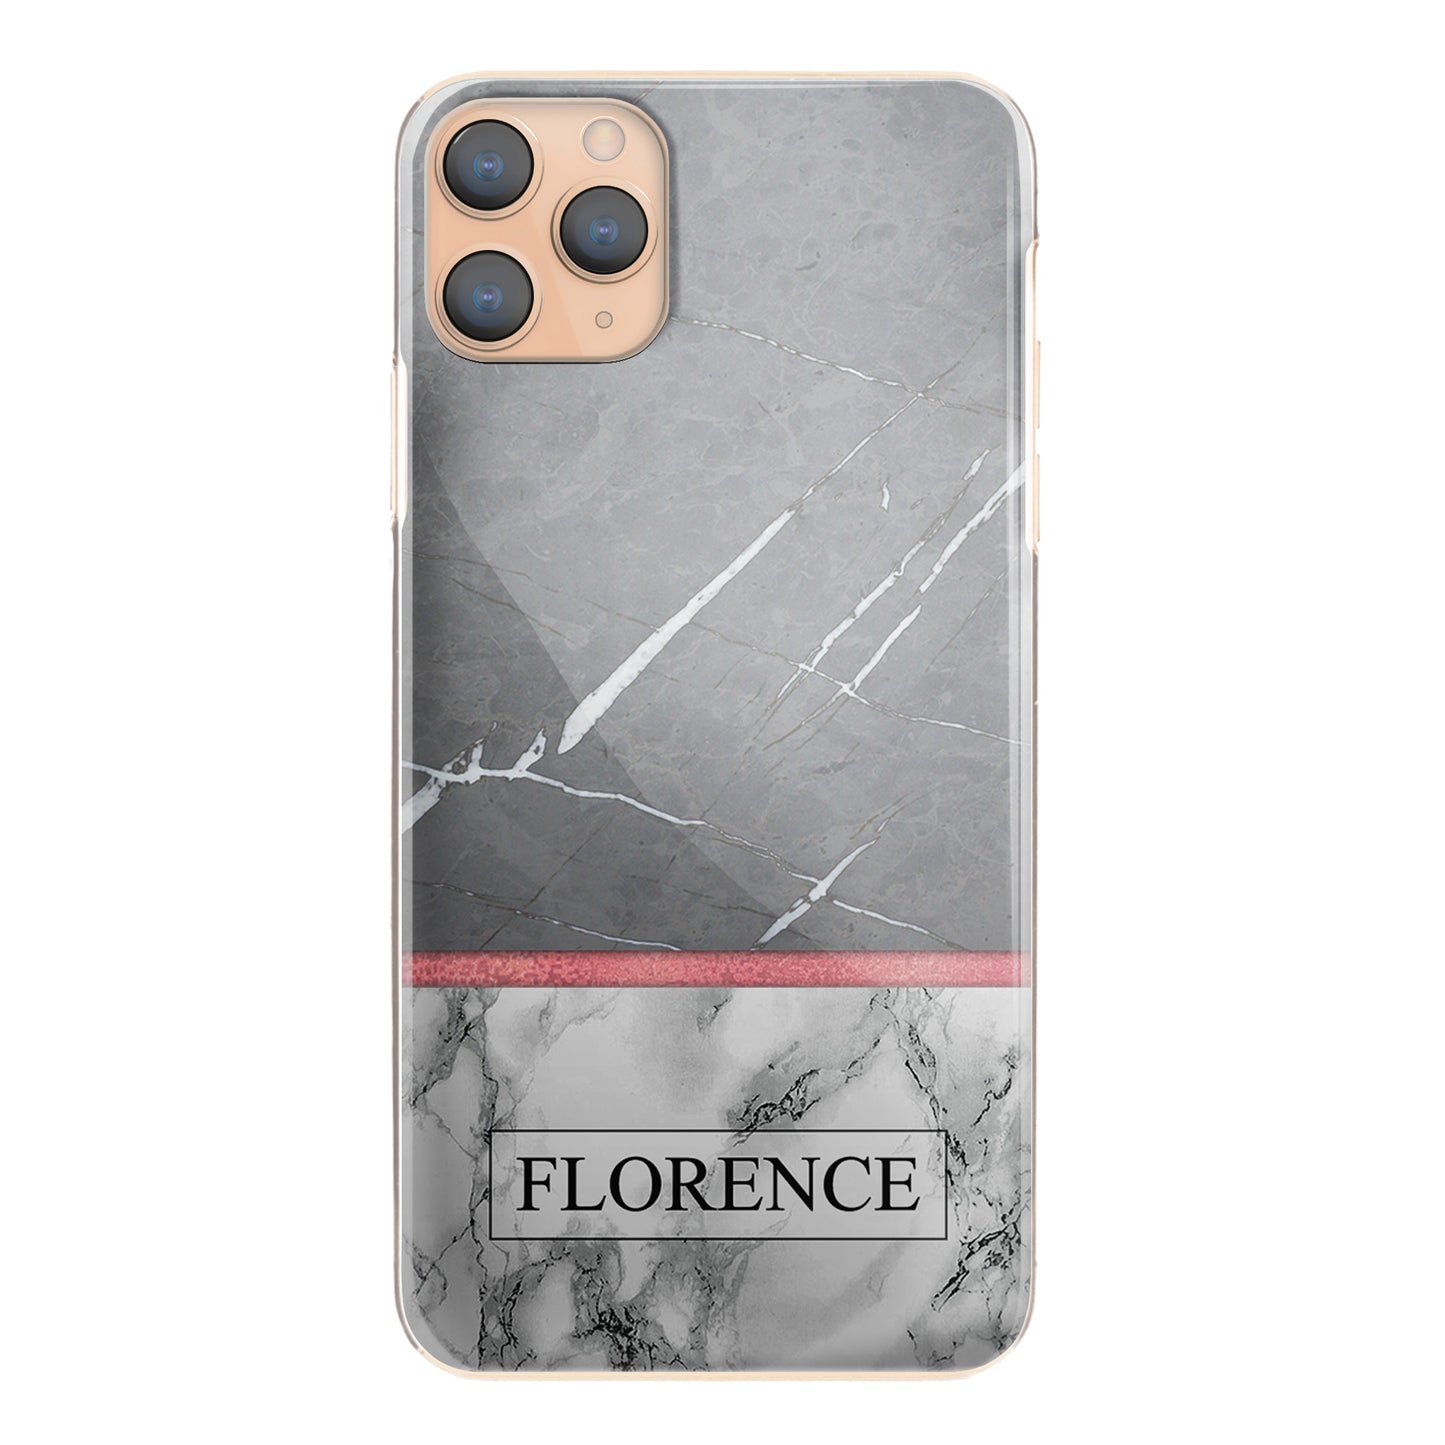 Personalised Huawei Phone Hard Case with Classy Text on Stylish Dual Marble